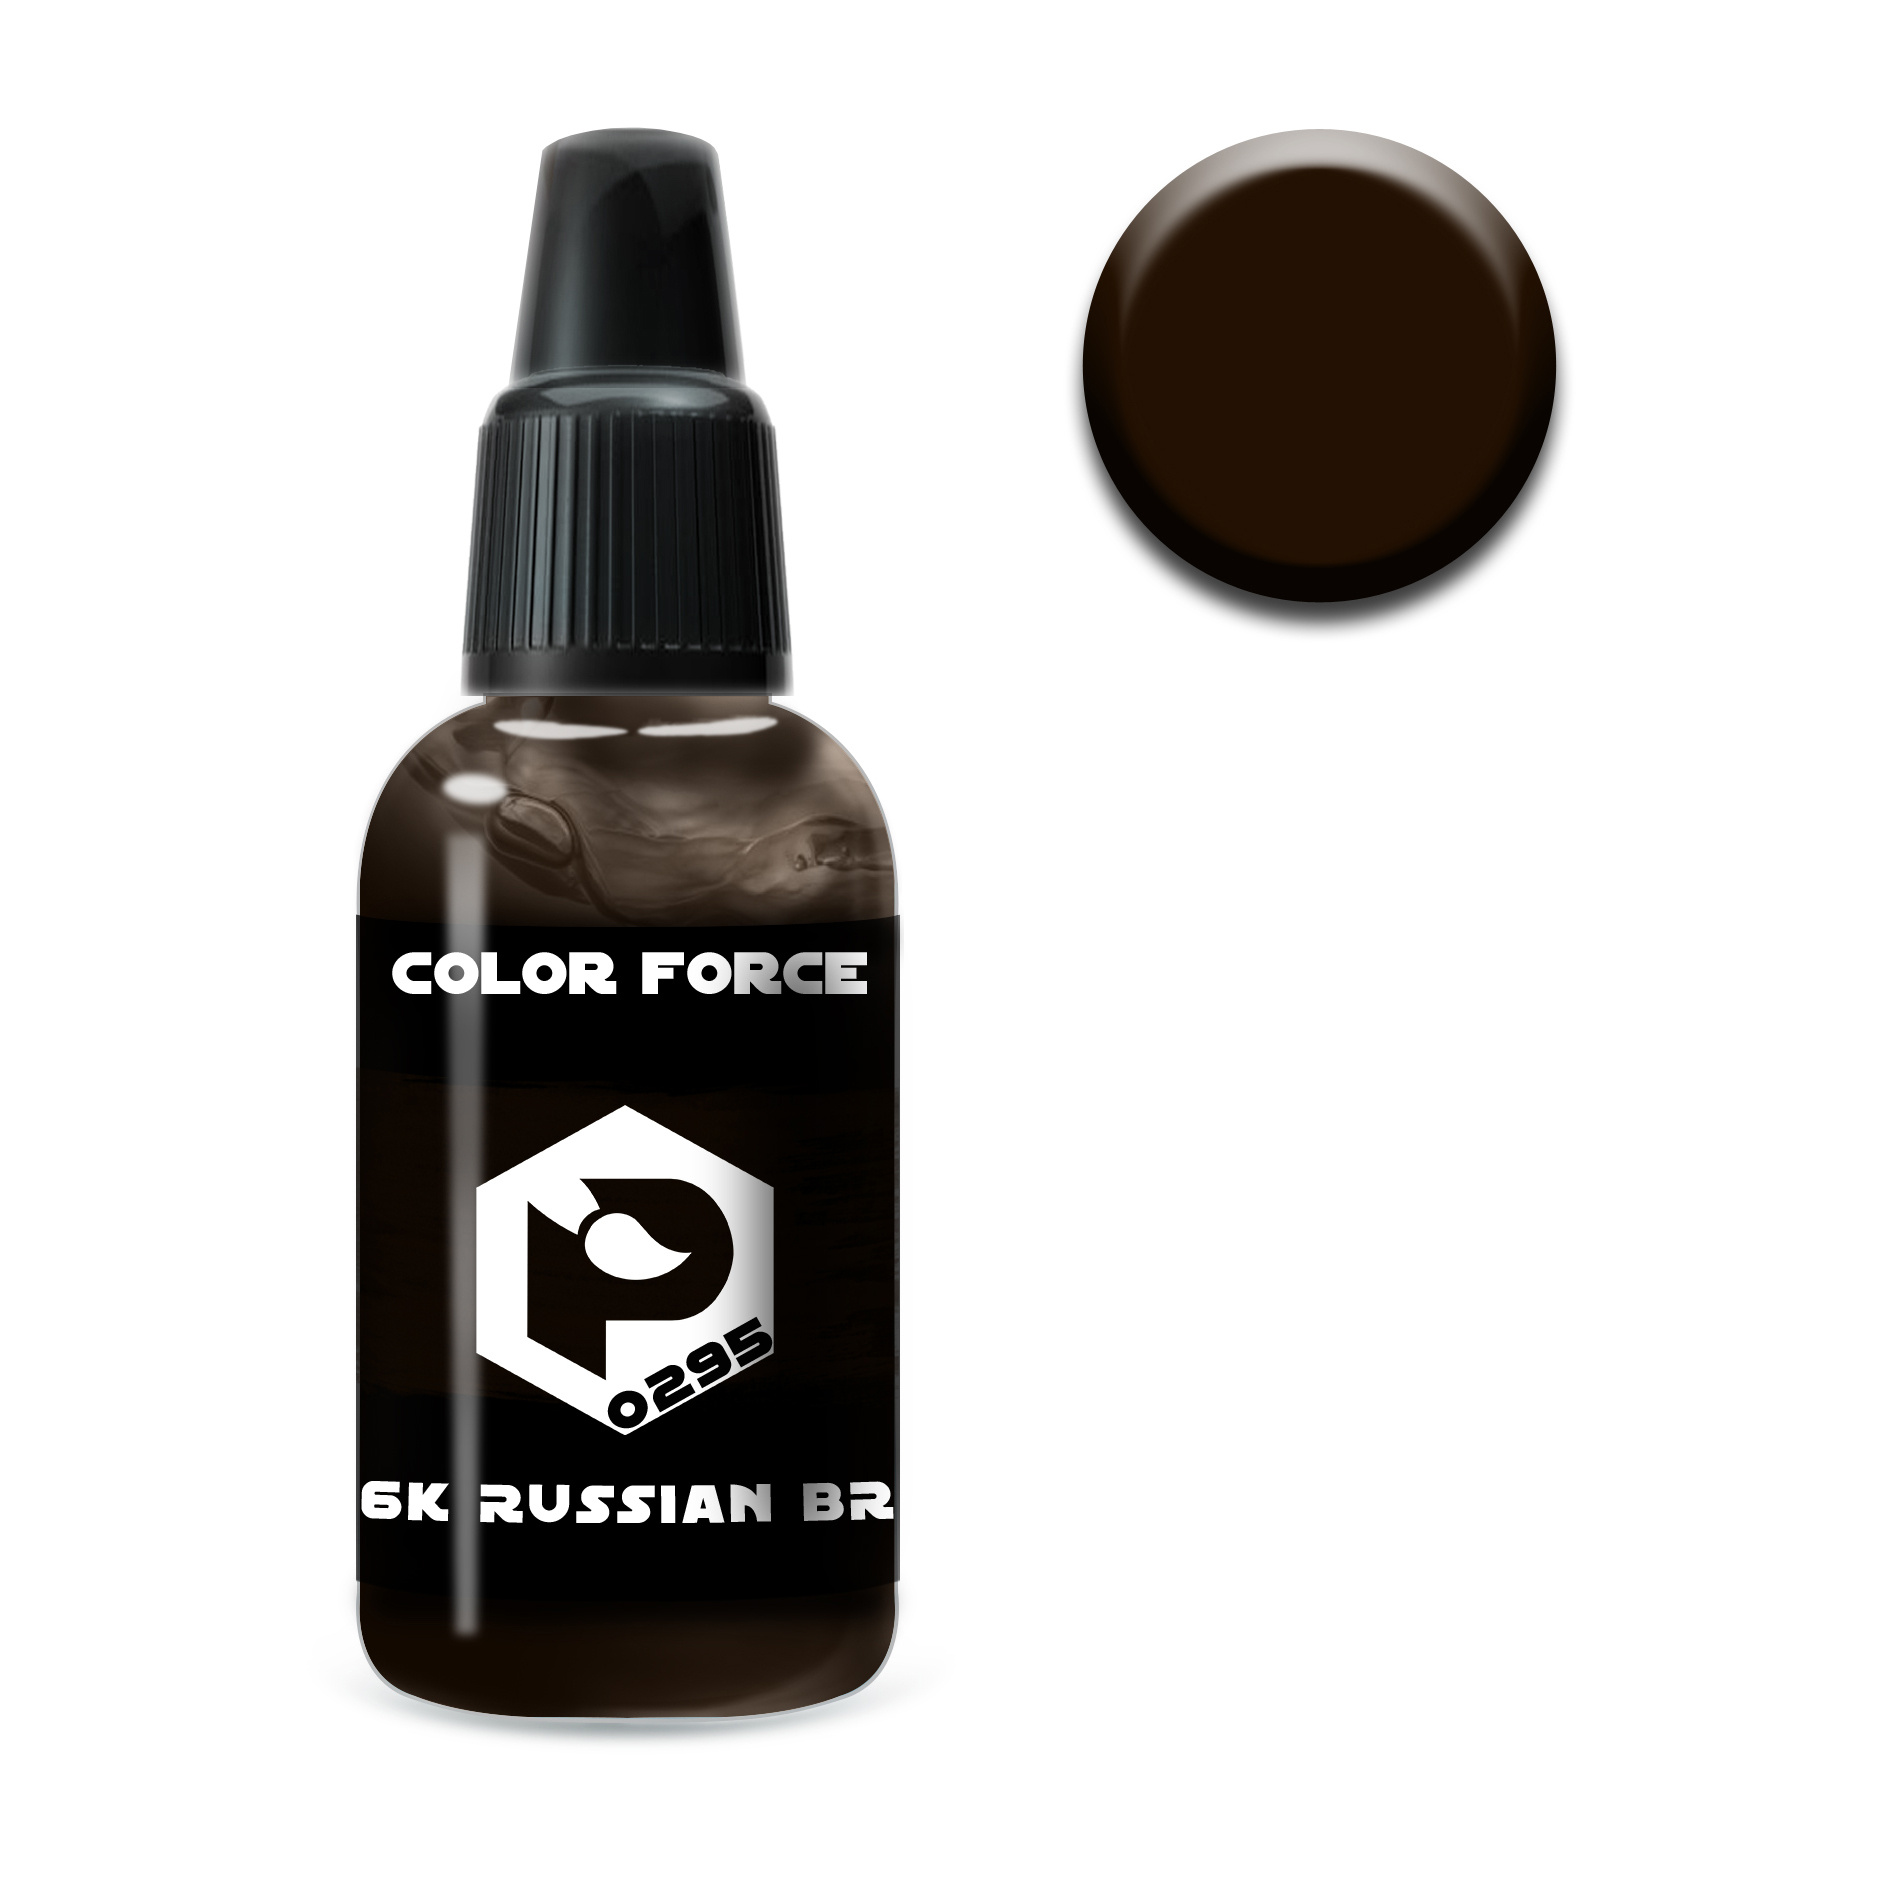 art.0295 Pacific88 Paint for airbrushing 6K RUSSIAN BROWN